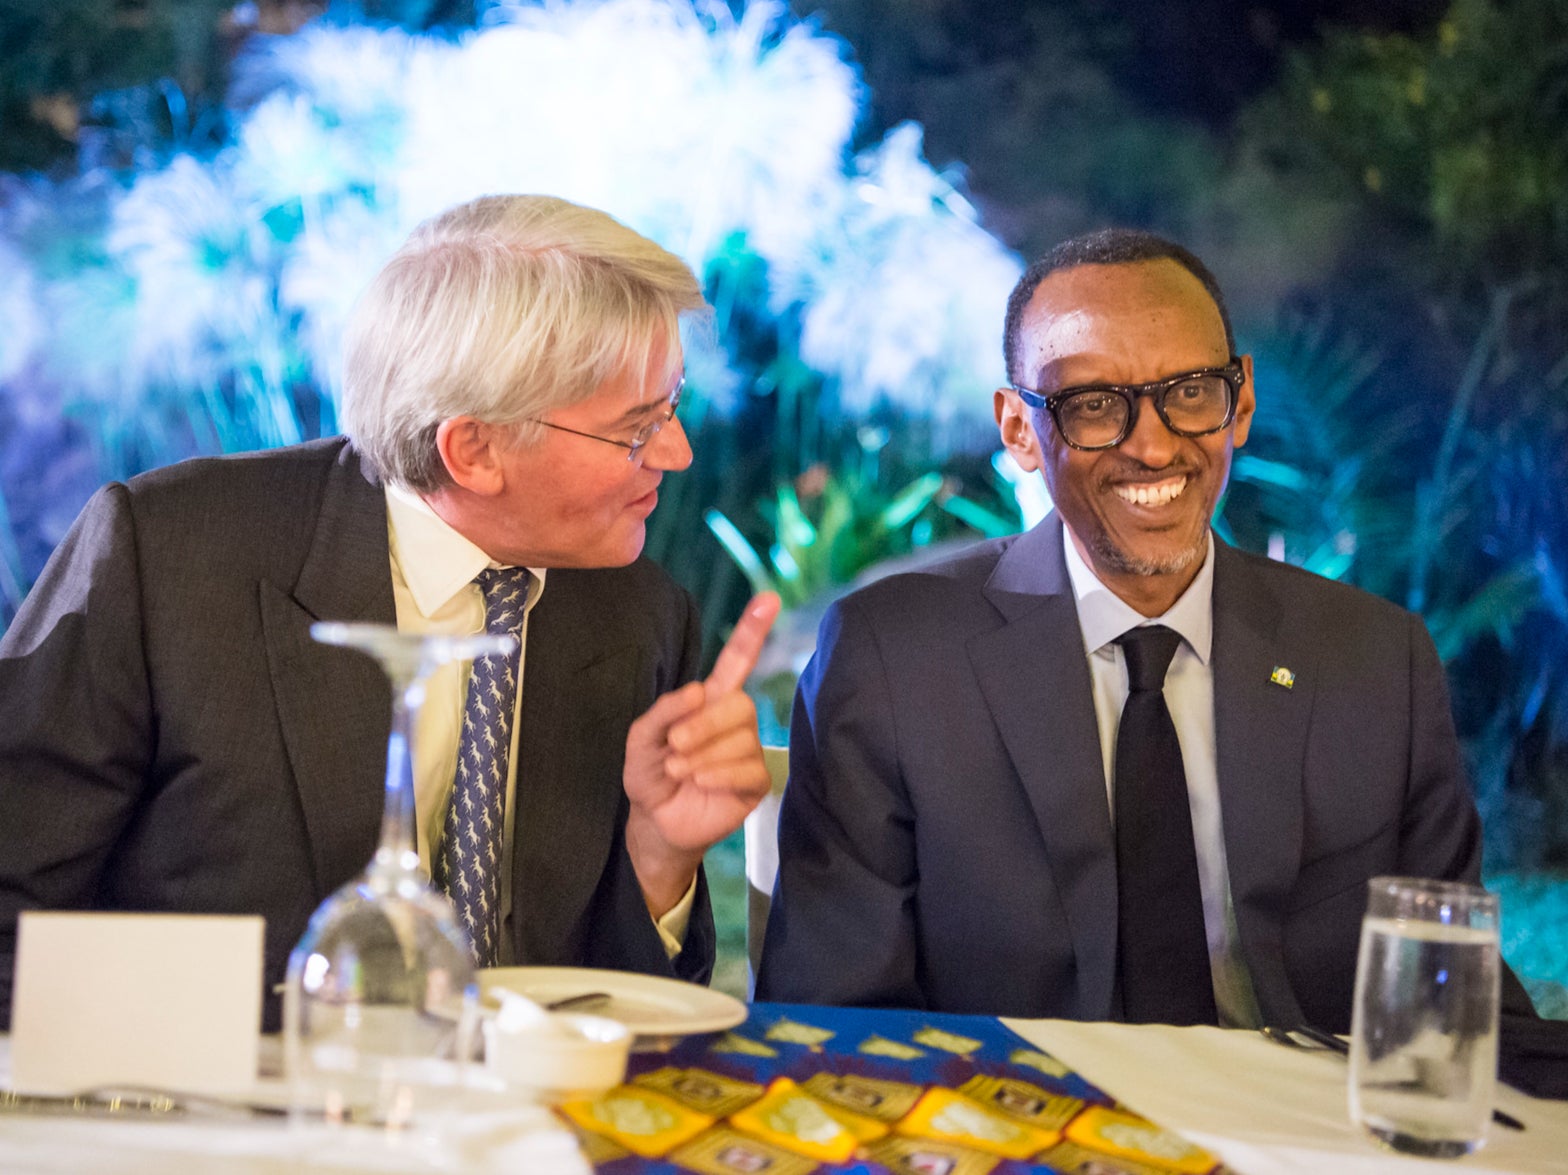 The charity built on work by a Conservative Party volunteering project backed by Rwandan president Paul Kagame, seen with Conservative MP Andrew Mitchell during a celebration for the 10th anniversary of Project Umubano in Kigali on 11 August 2017